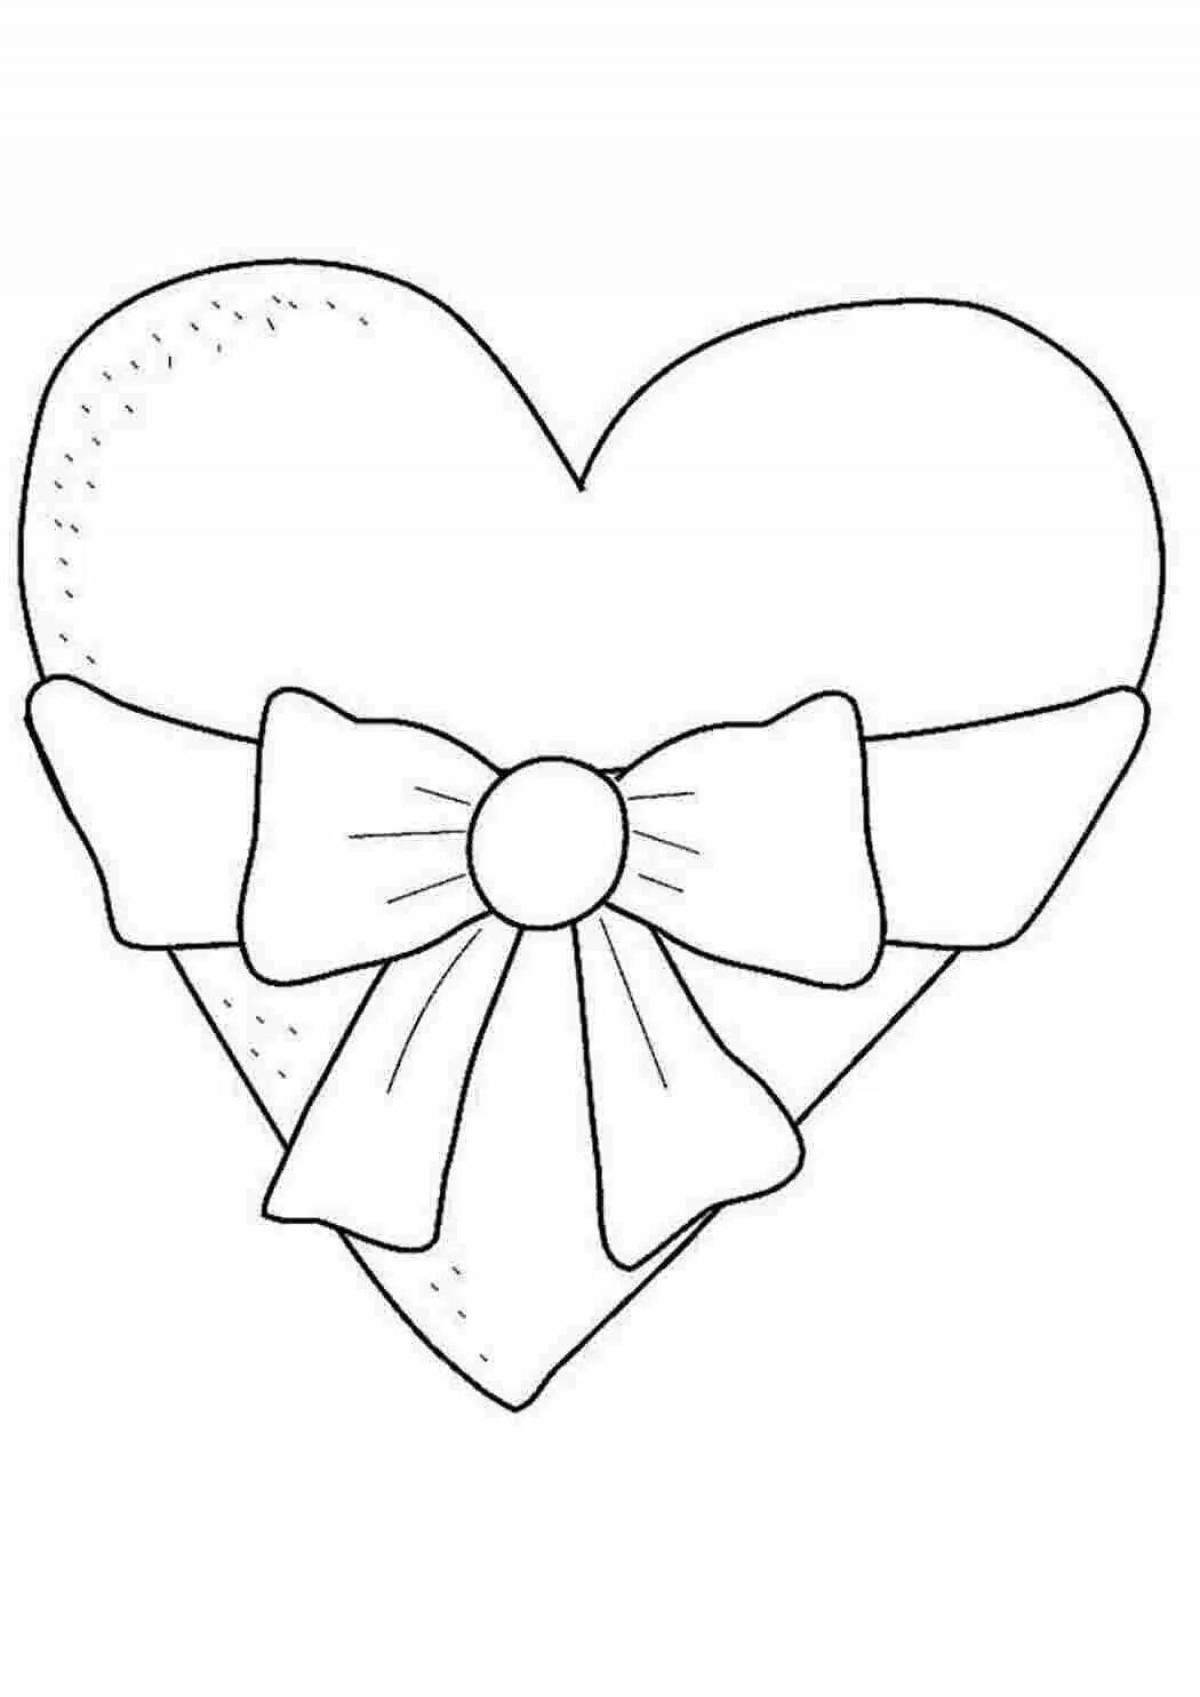 Great heart coloring page